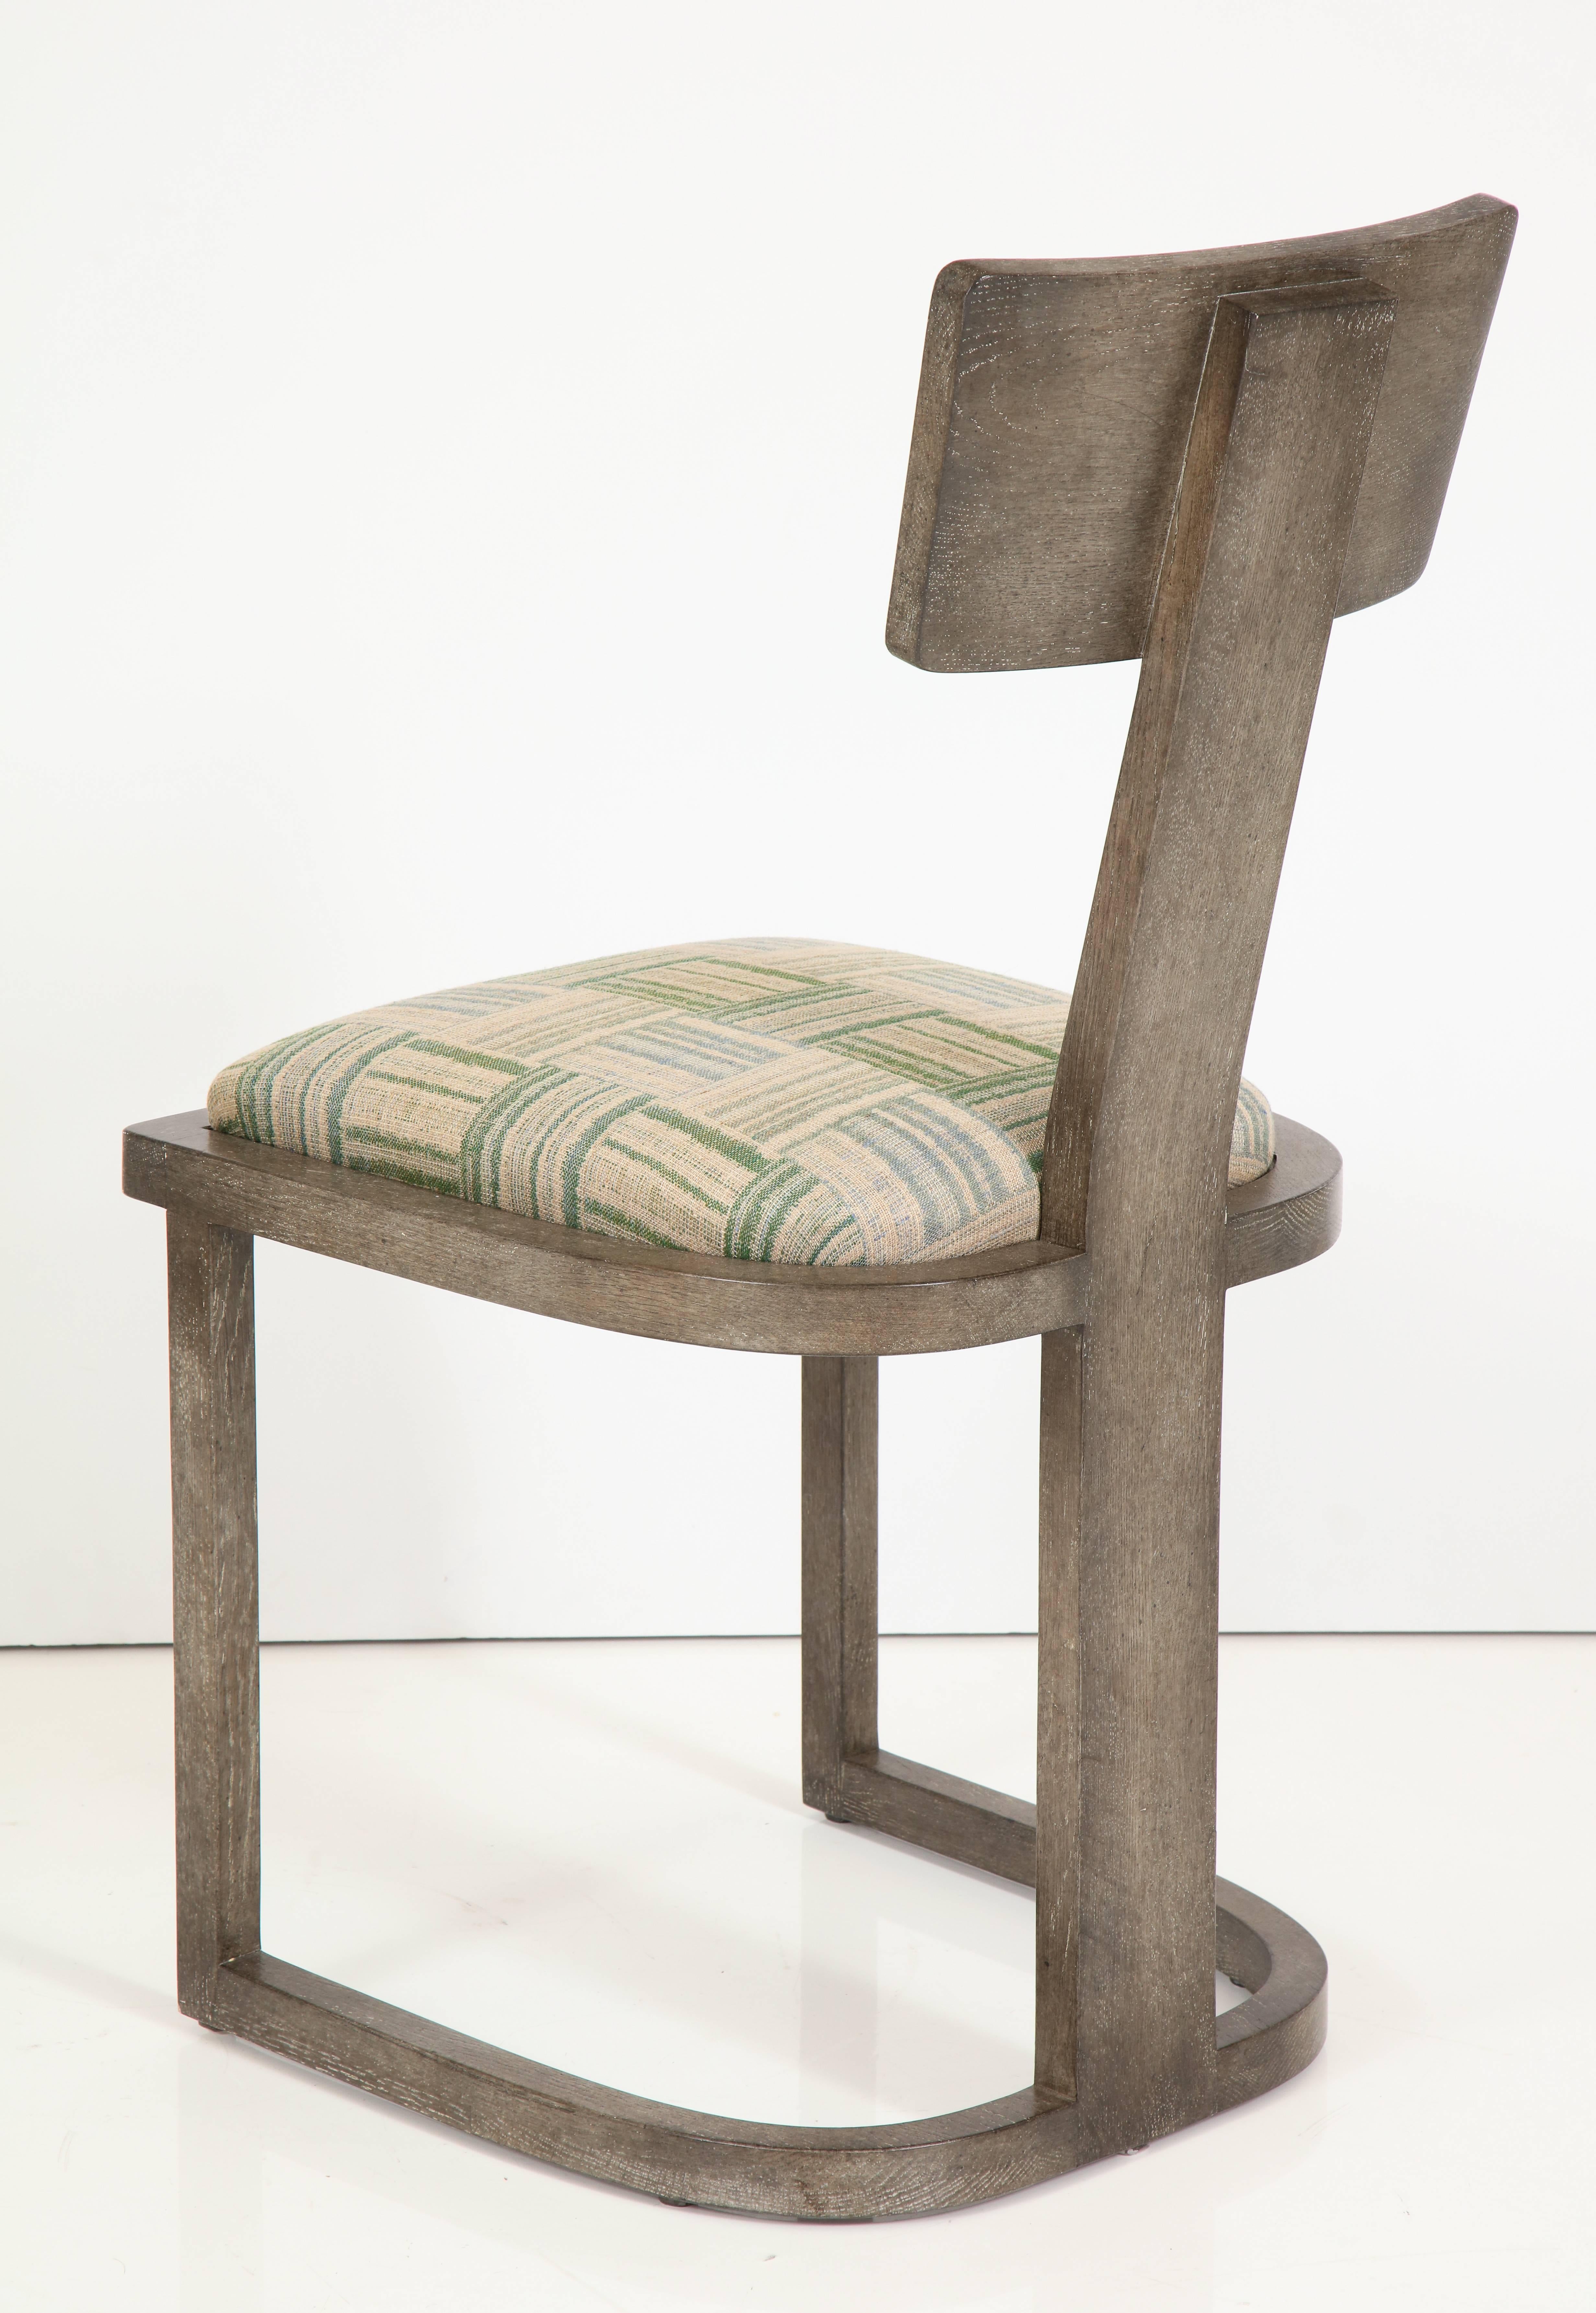 Contemporary NK Collection T Chair Upholstered in Green Plaid Finish in Smoked Oak